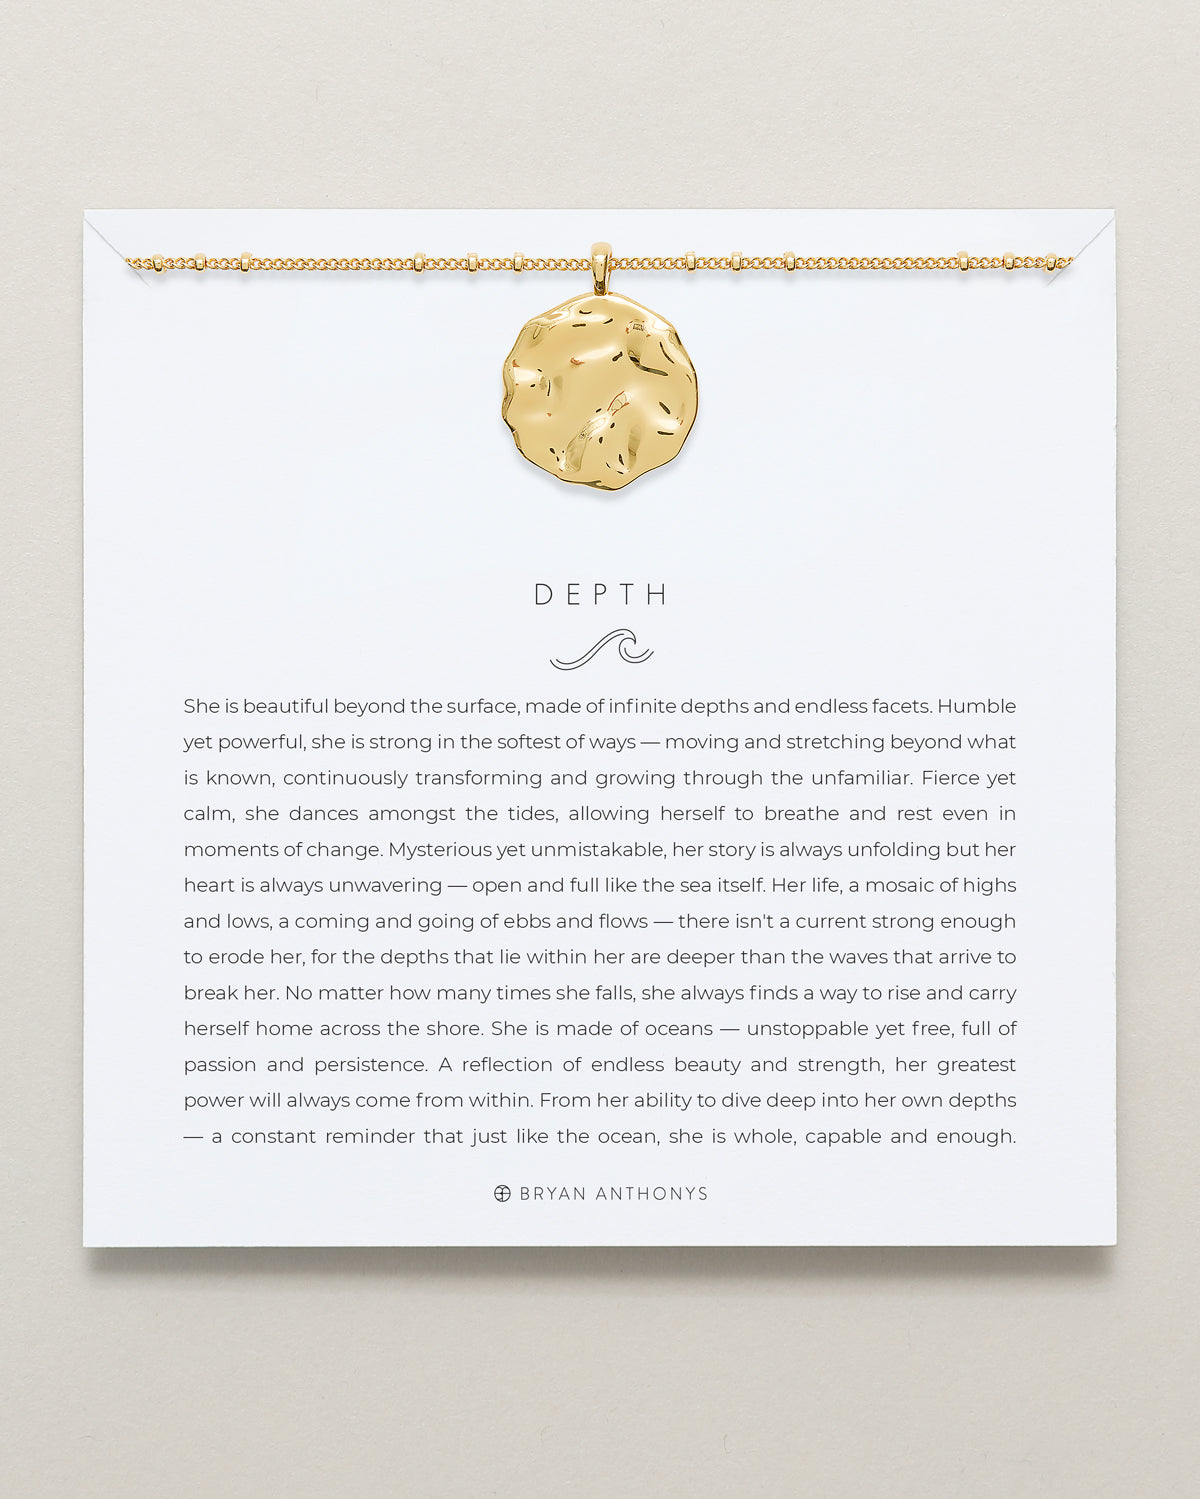 Bryan Anthonys Gold Depth Pendant Necklace On Card